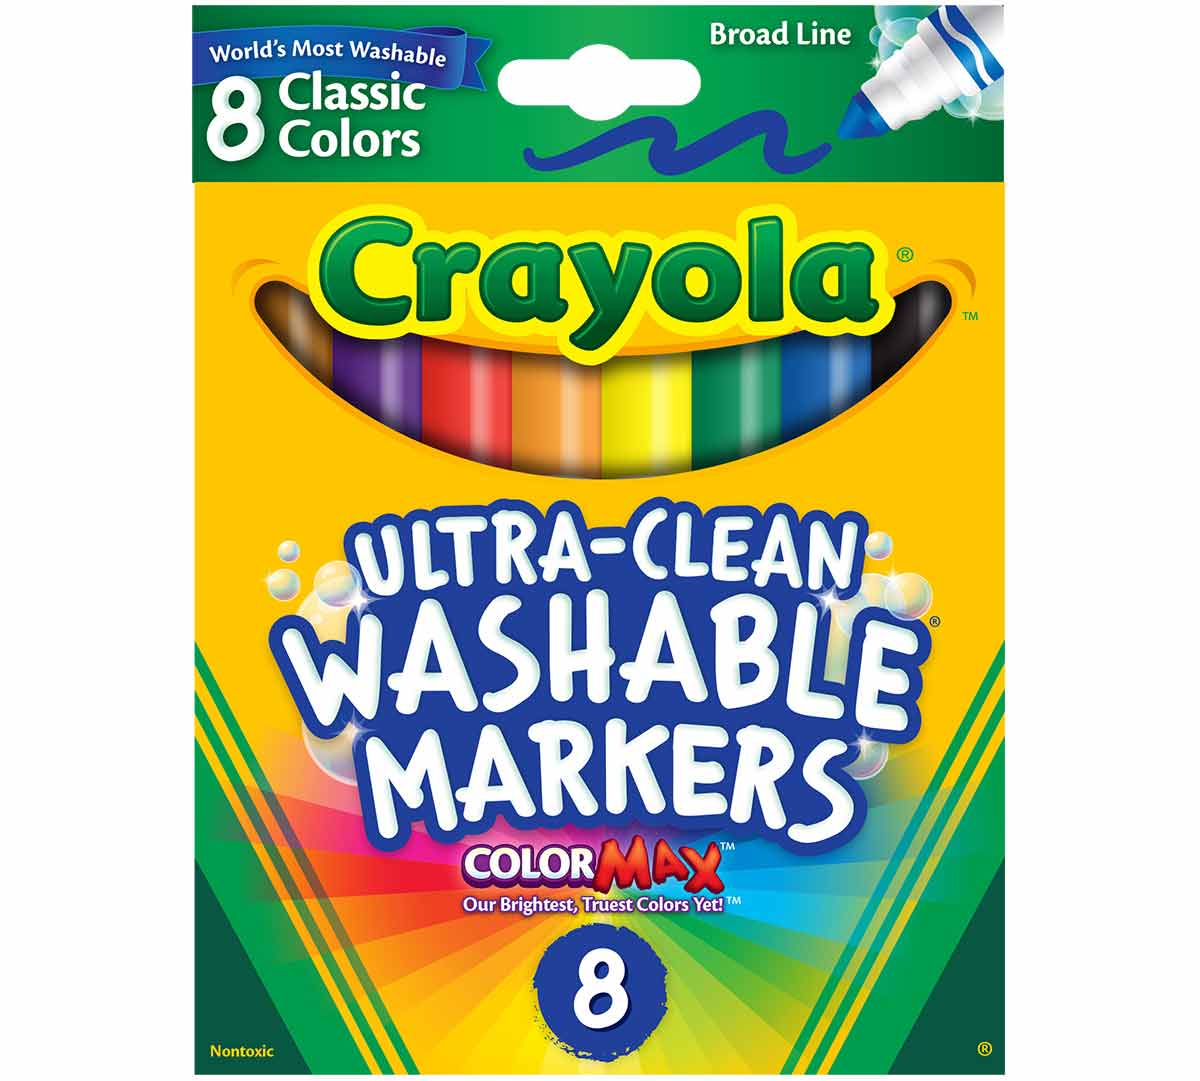 https://shop.crayola.com/on/demandware.static/-/Sites-crayola-storefront/default/dw7ae01004/images/58-7808-0-231_8ct-UC-Washable-Markers-Classic-BL_F-R.jpg